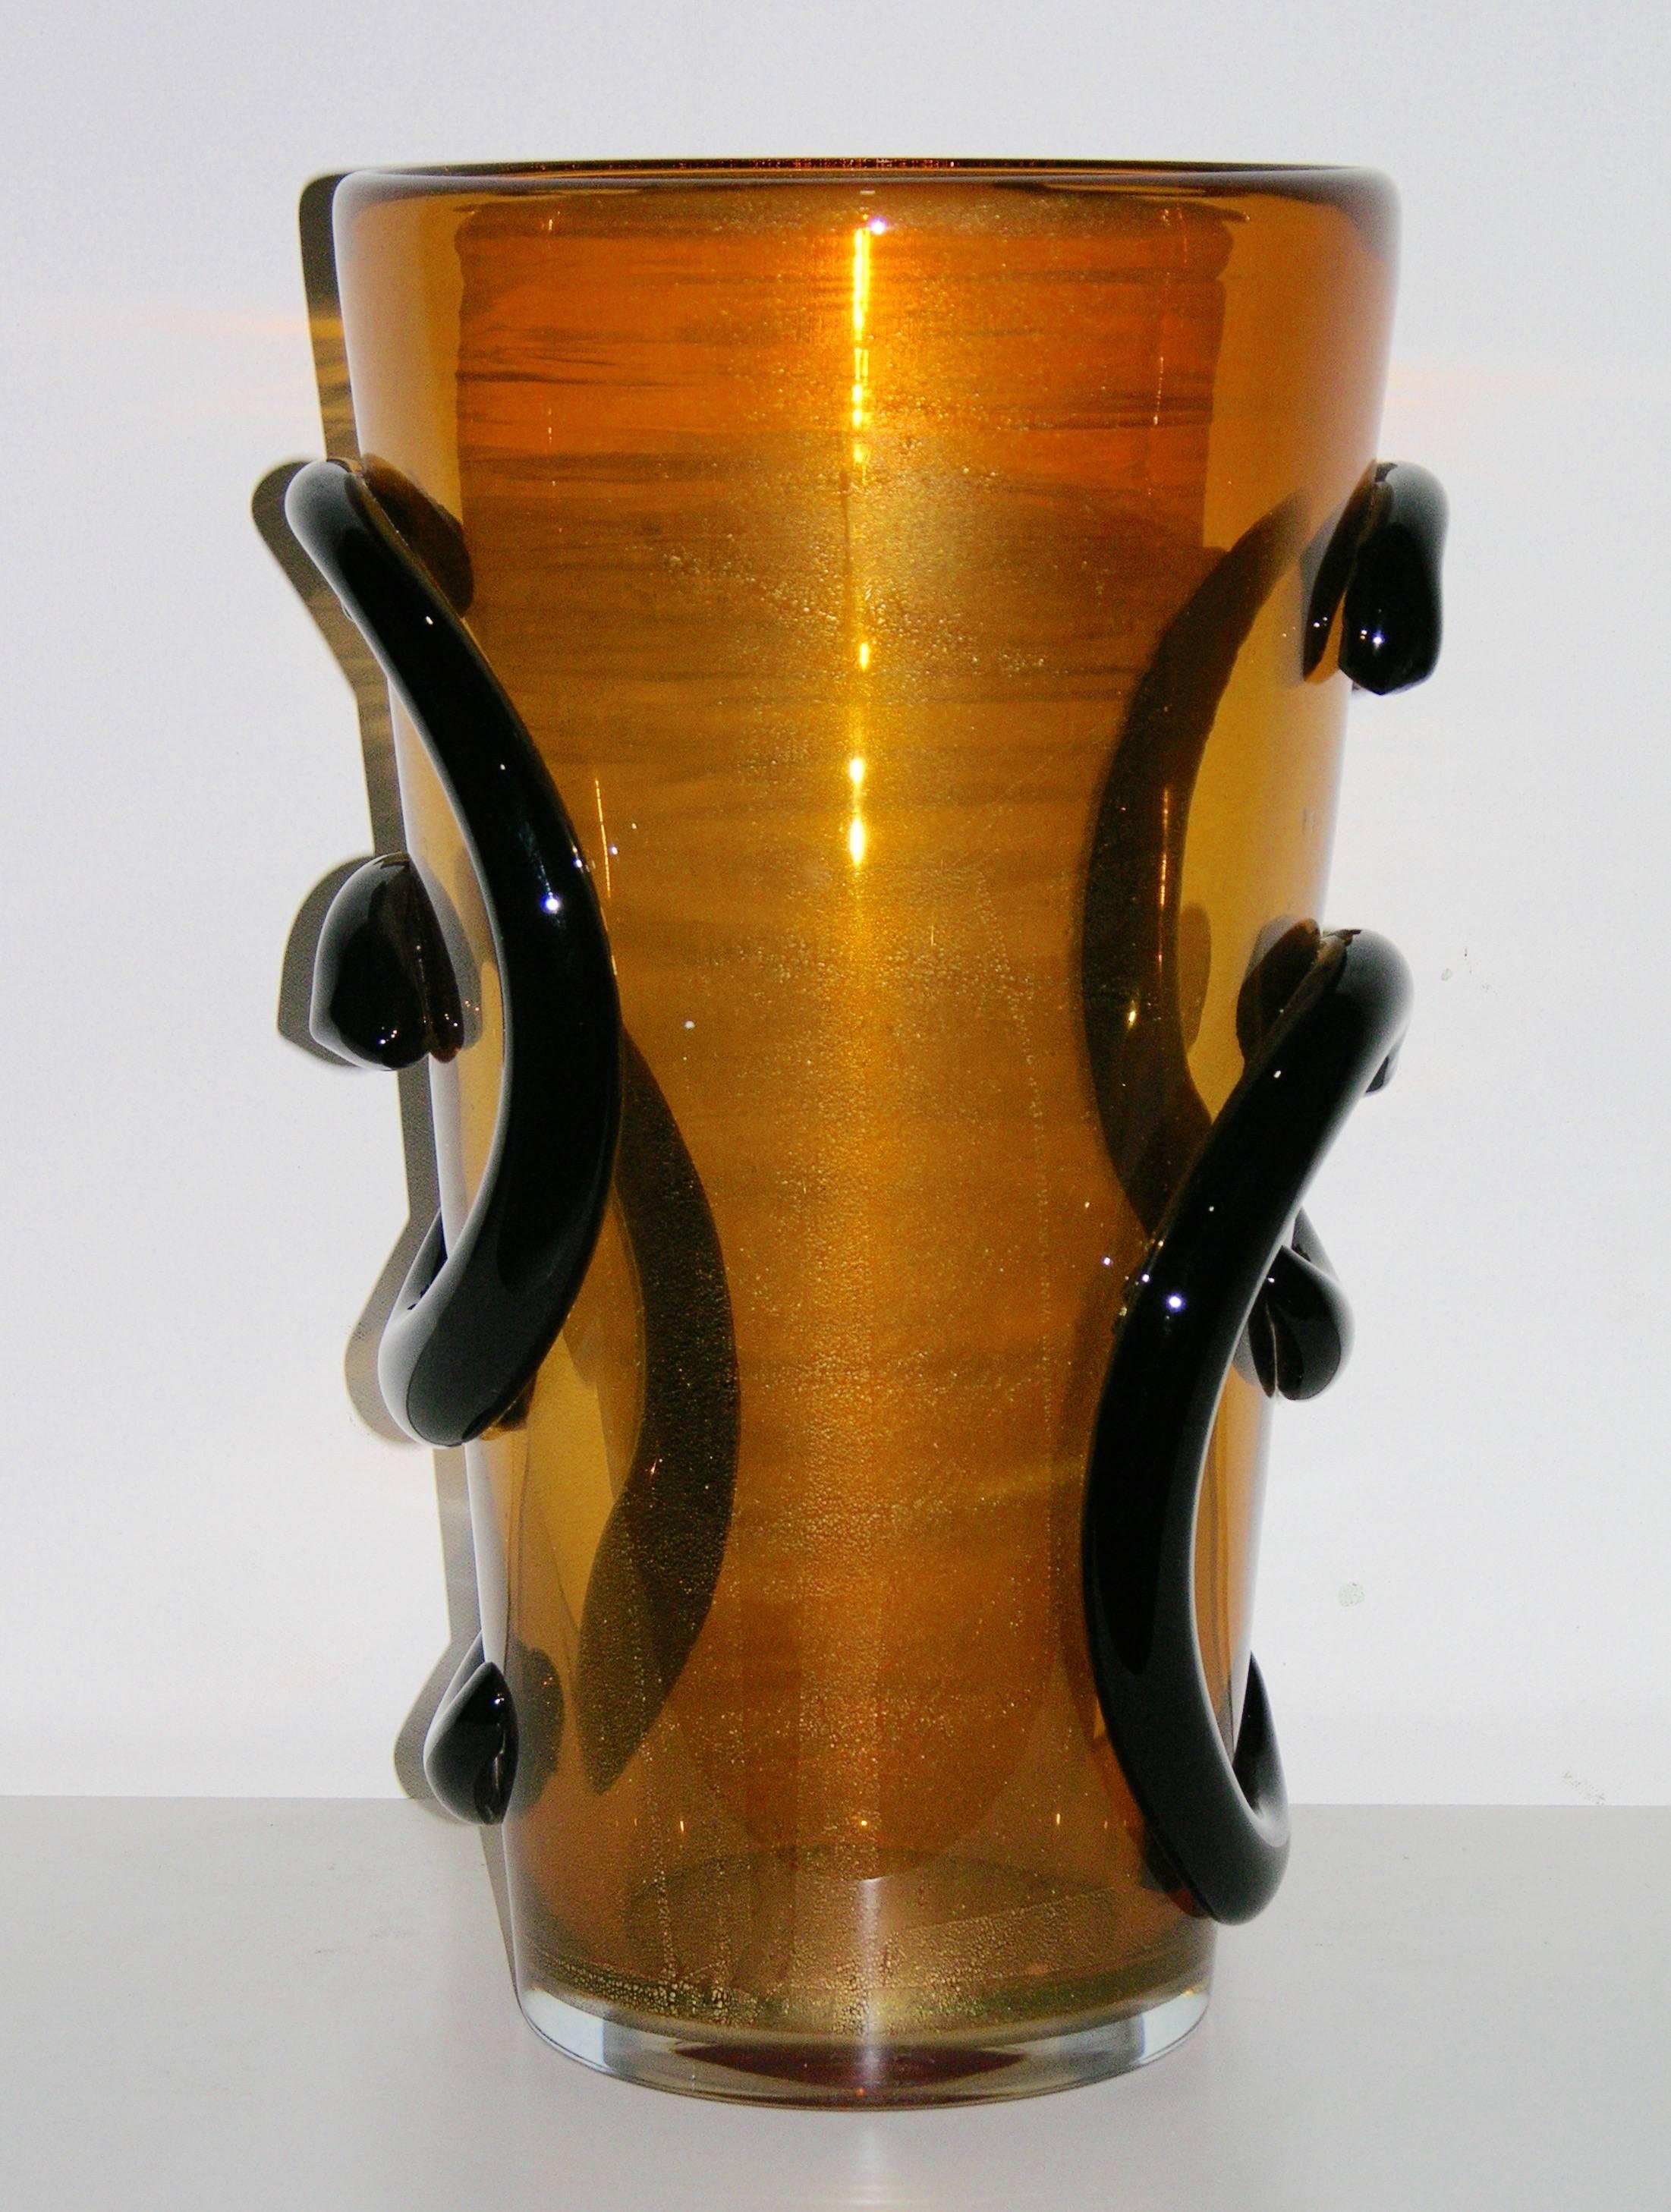 1980s, elegant pair of vases in amber blown Murano glass with pure 24-karat gold worked through that creates a fired shimmering finish and glow. 
The color is striking and highlighted with “C” black glass scrolls in relief, adding uniqueness and